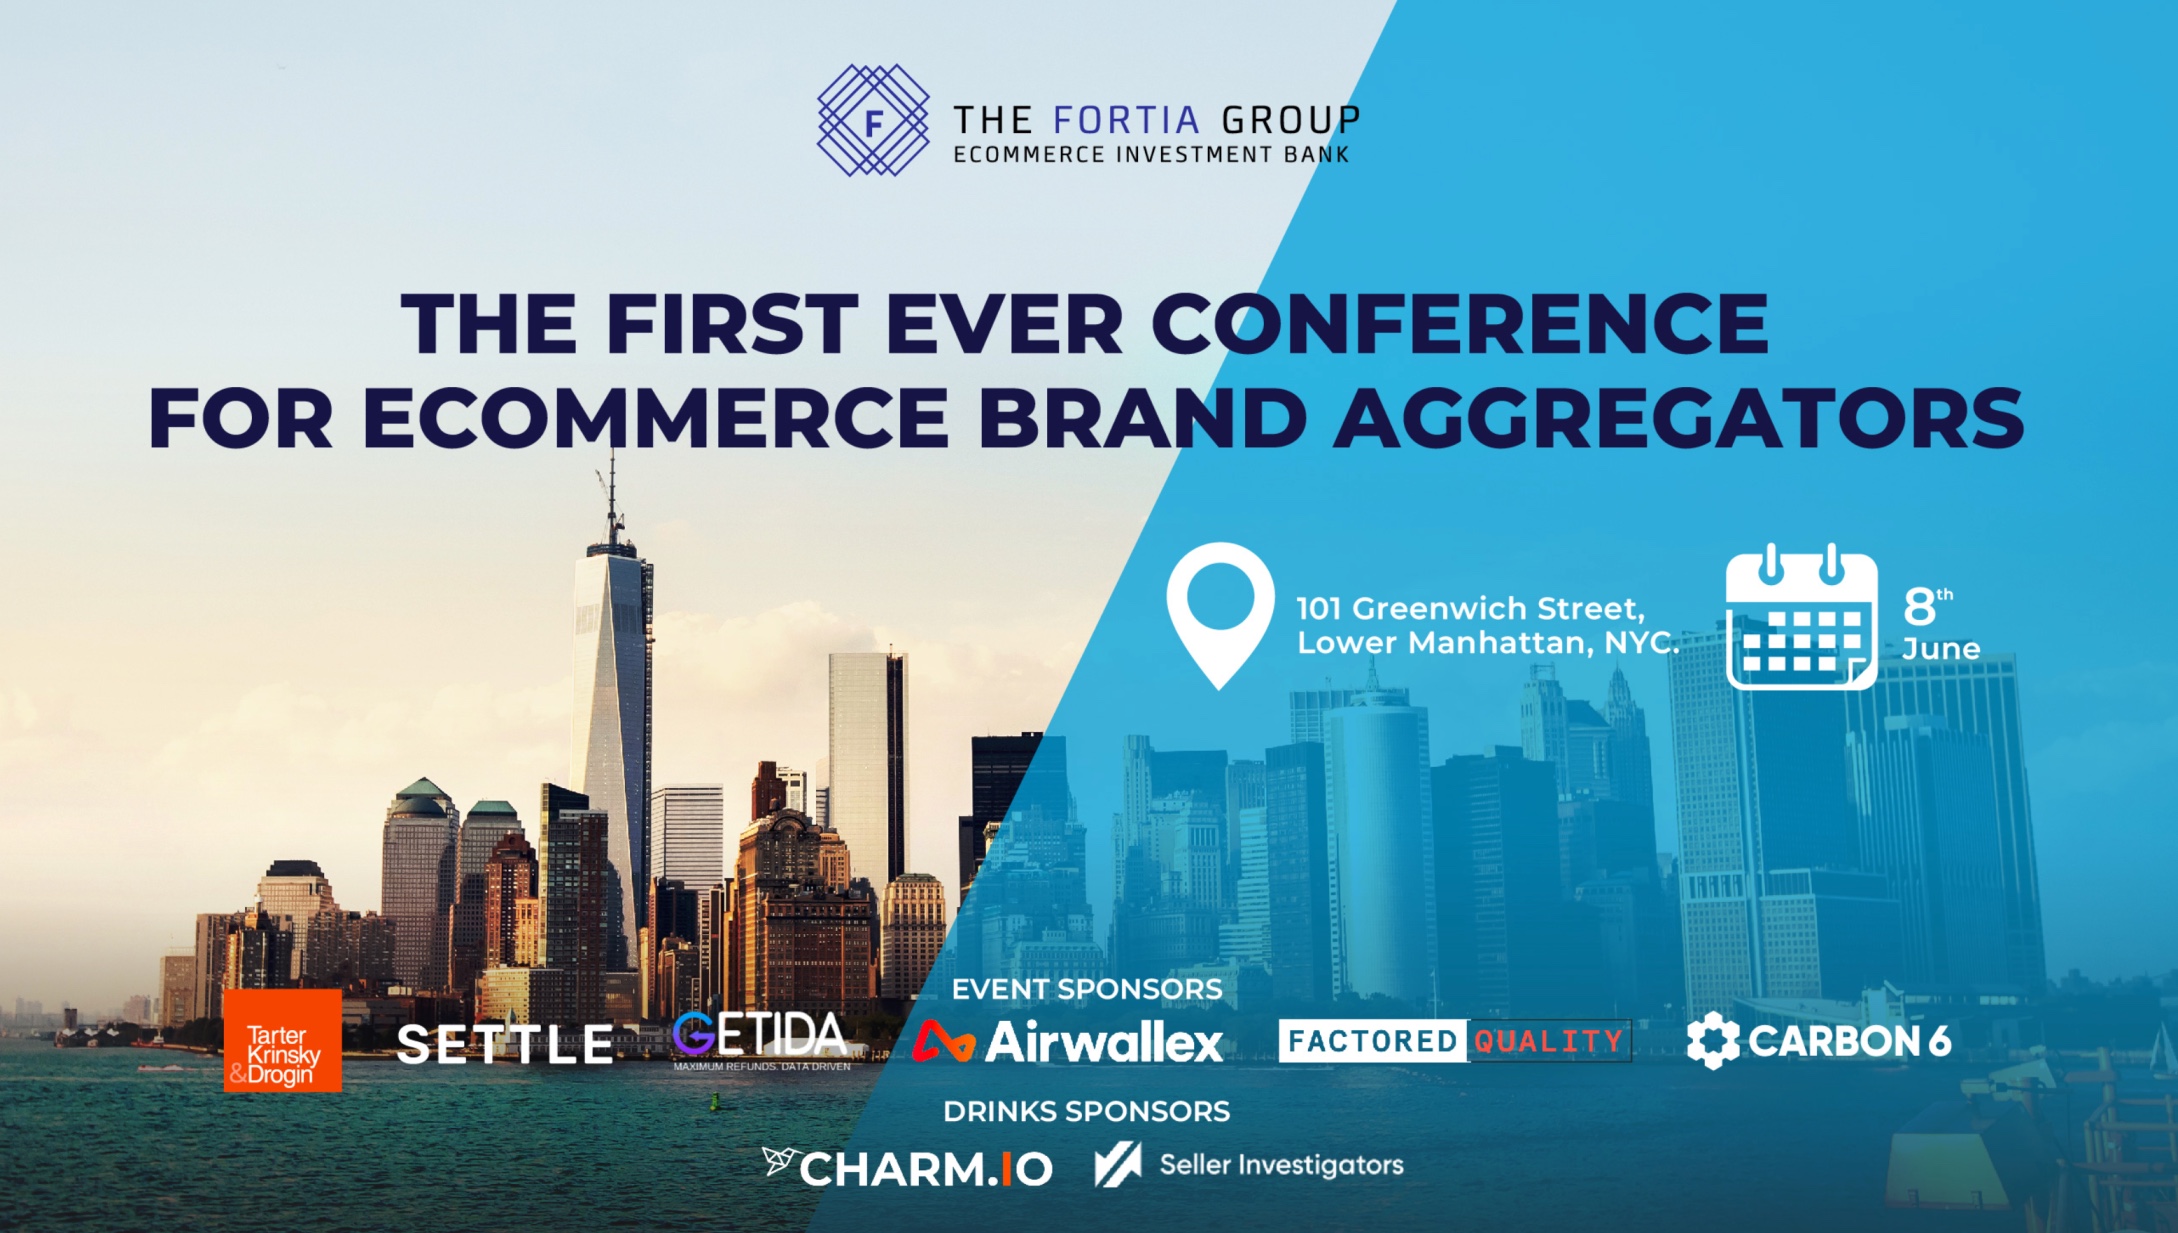 Key Takeaways From The First Ever Conference For eCommerce Brand Acquirors